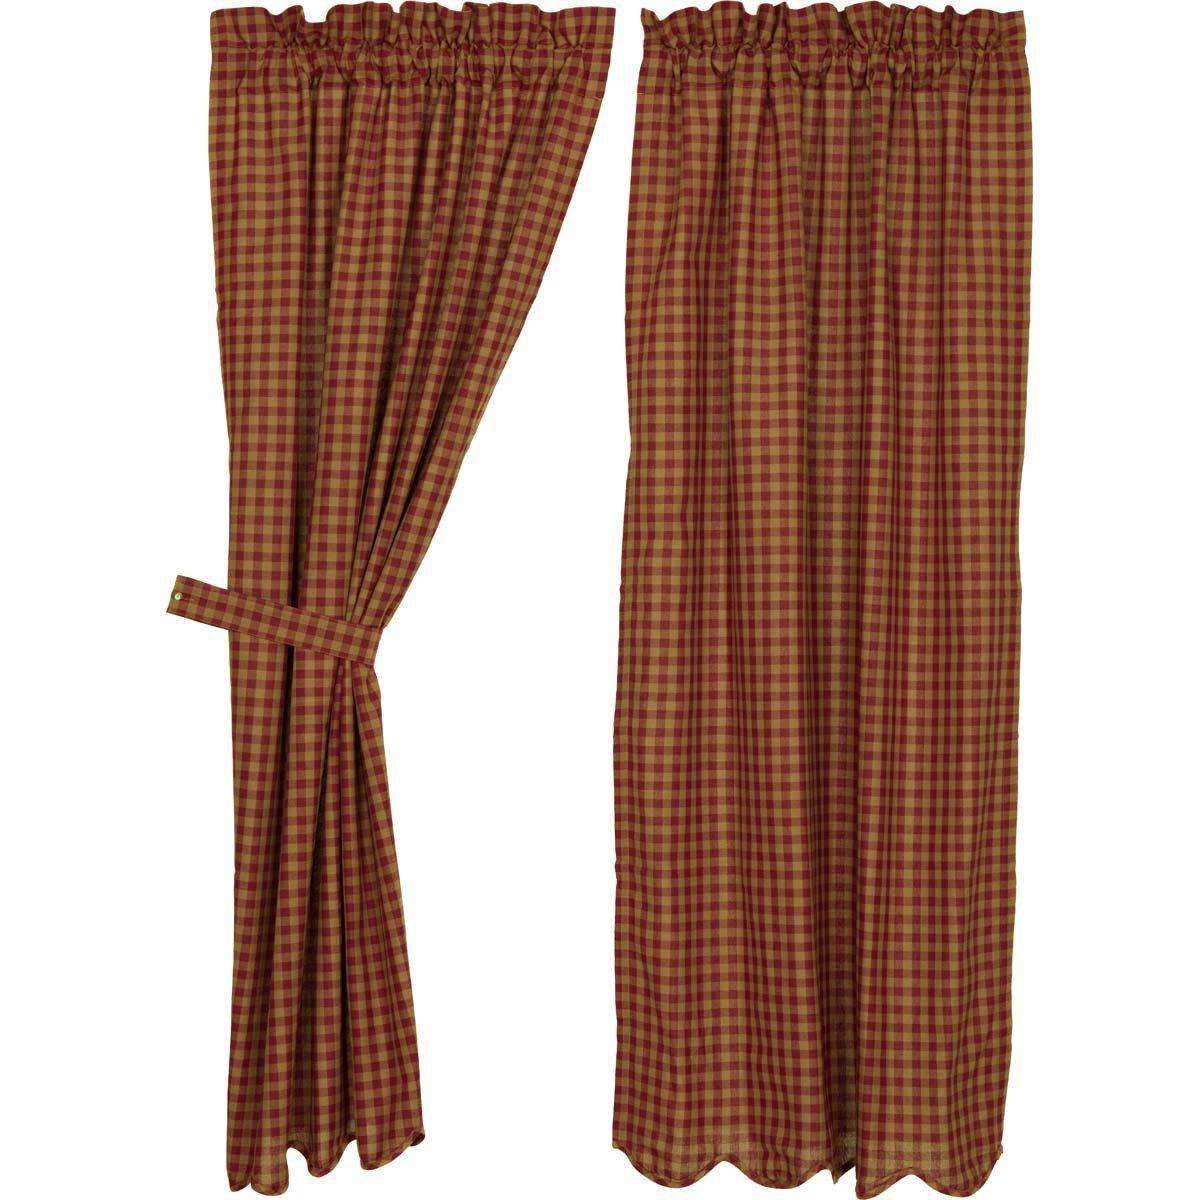 Burgundy Check Scalloped Short Panel Curtain Set of 2 63"x36" VHC Brands - The Fox Decor